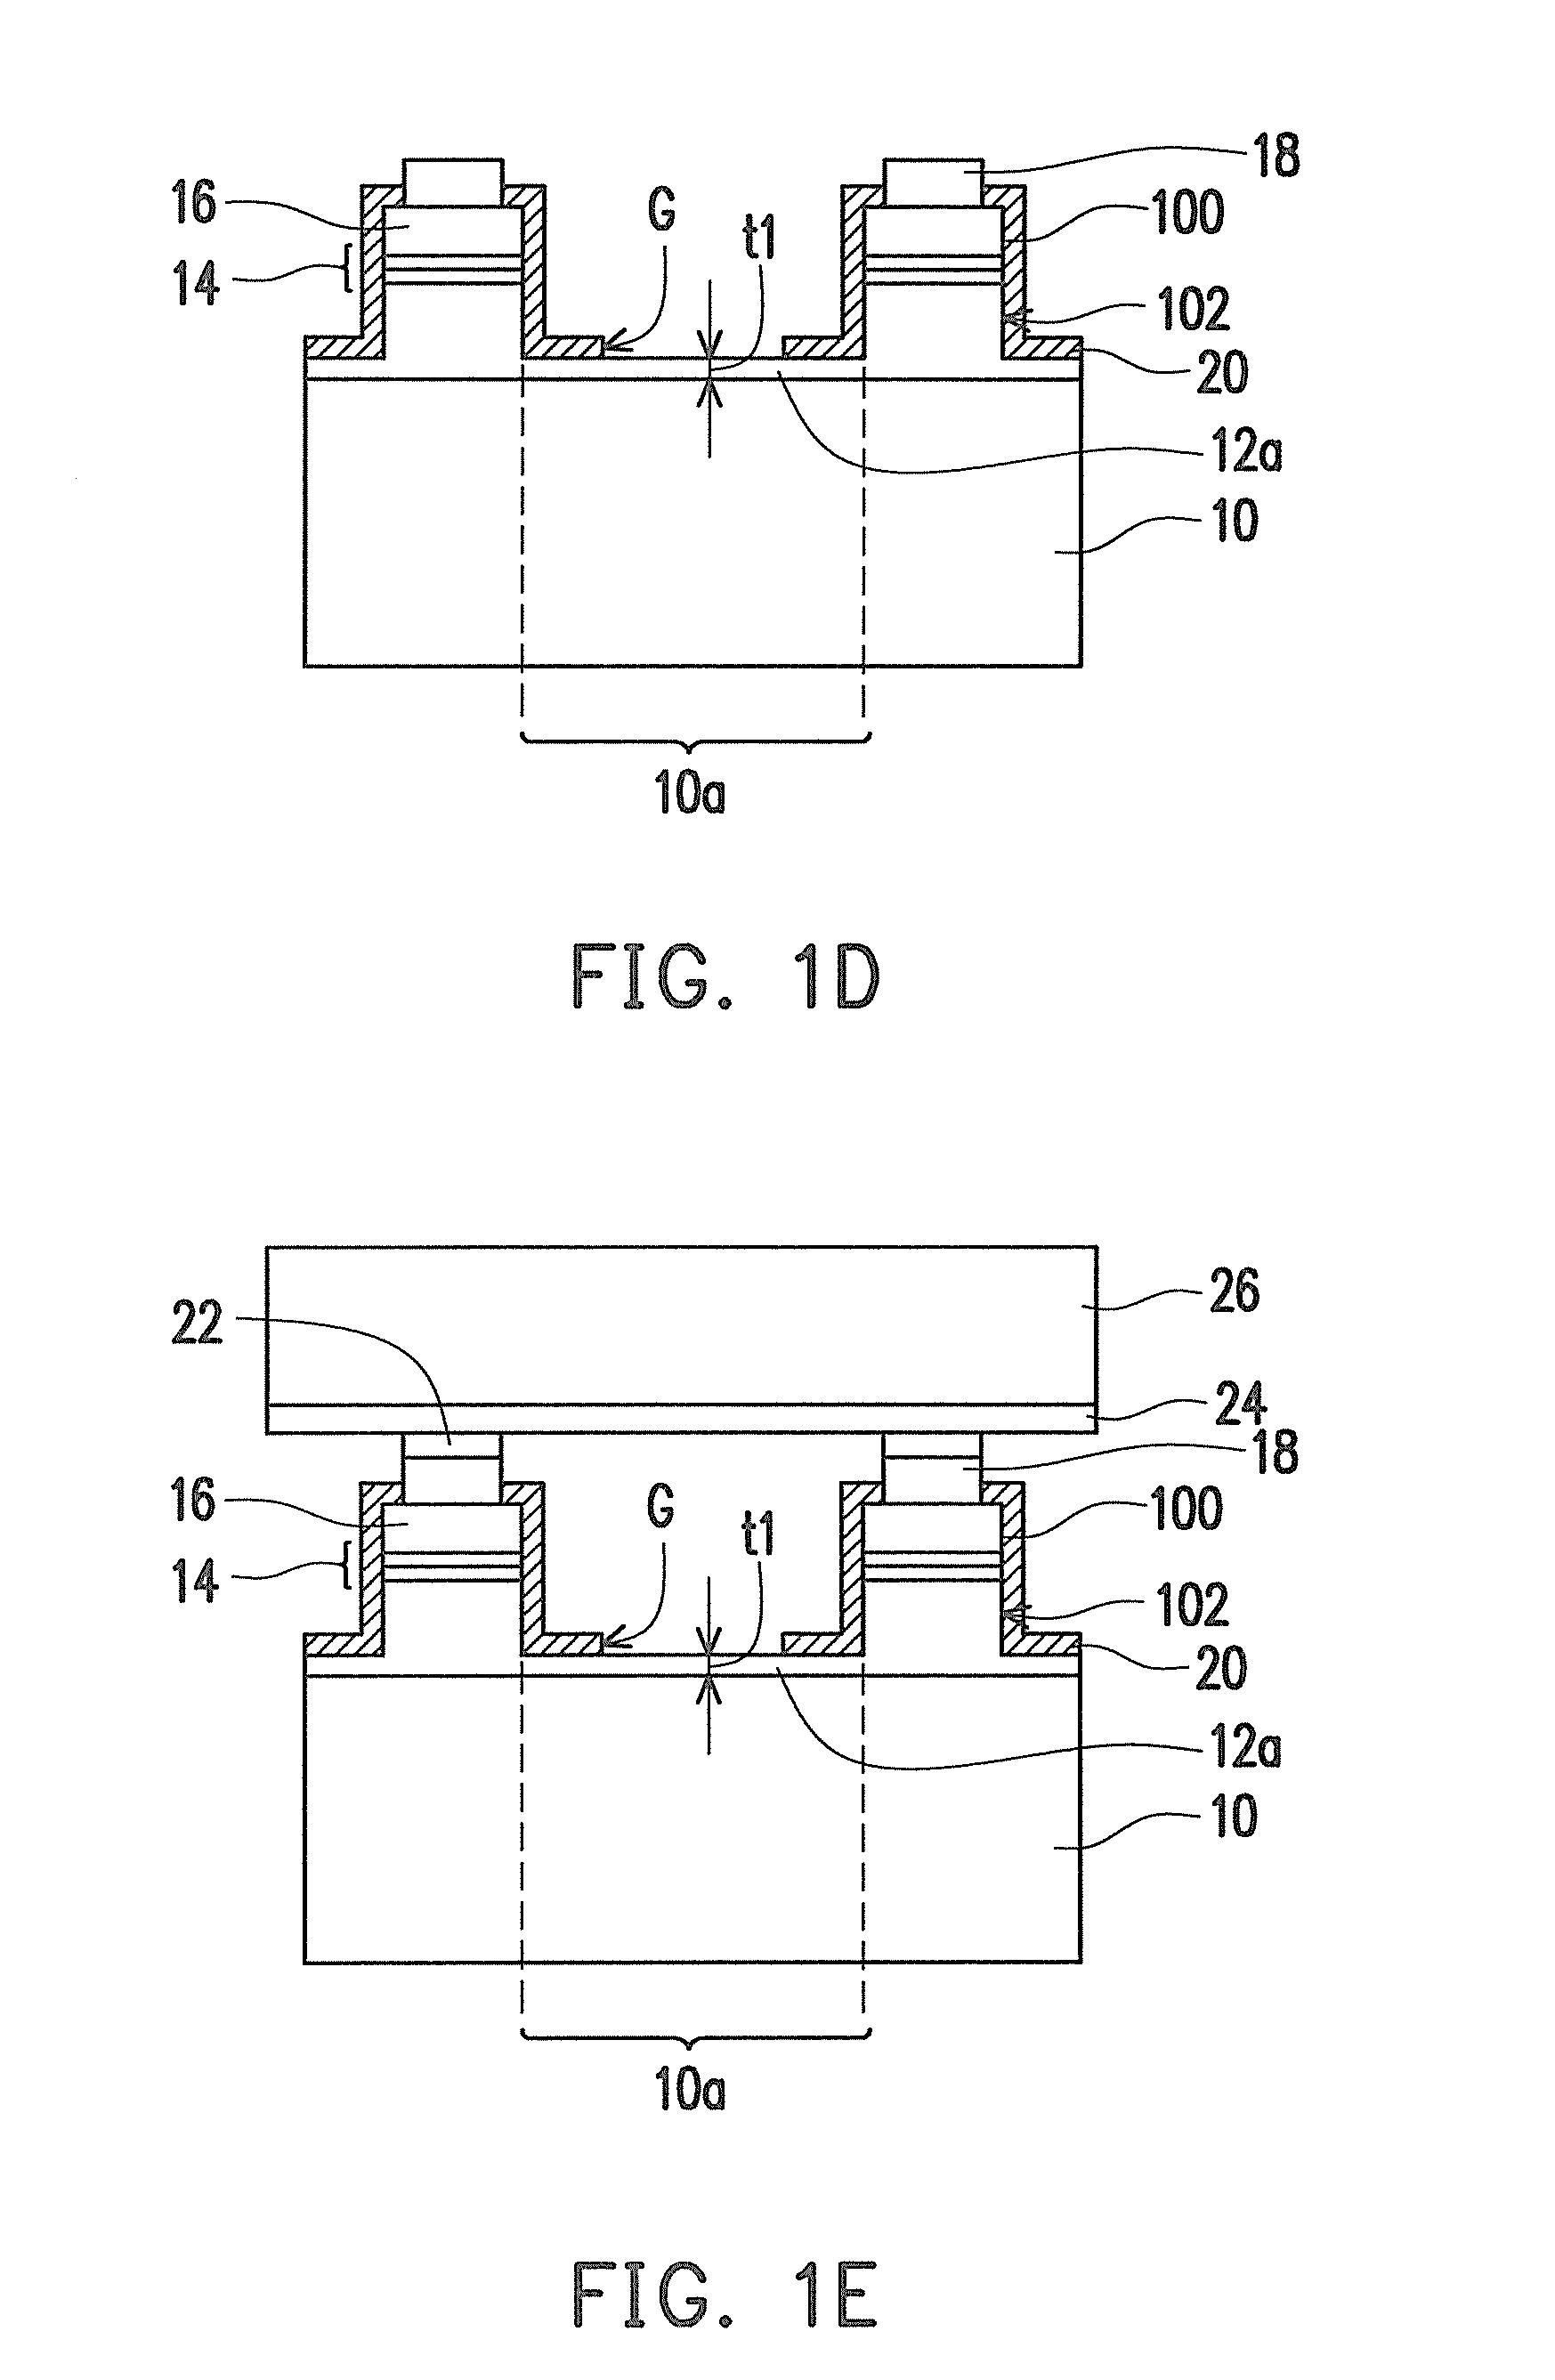 Method of manufacturing a light emitting diode element